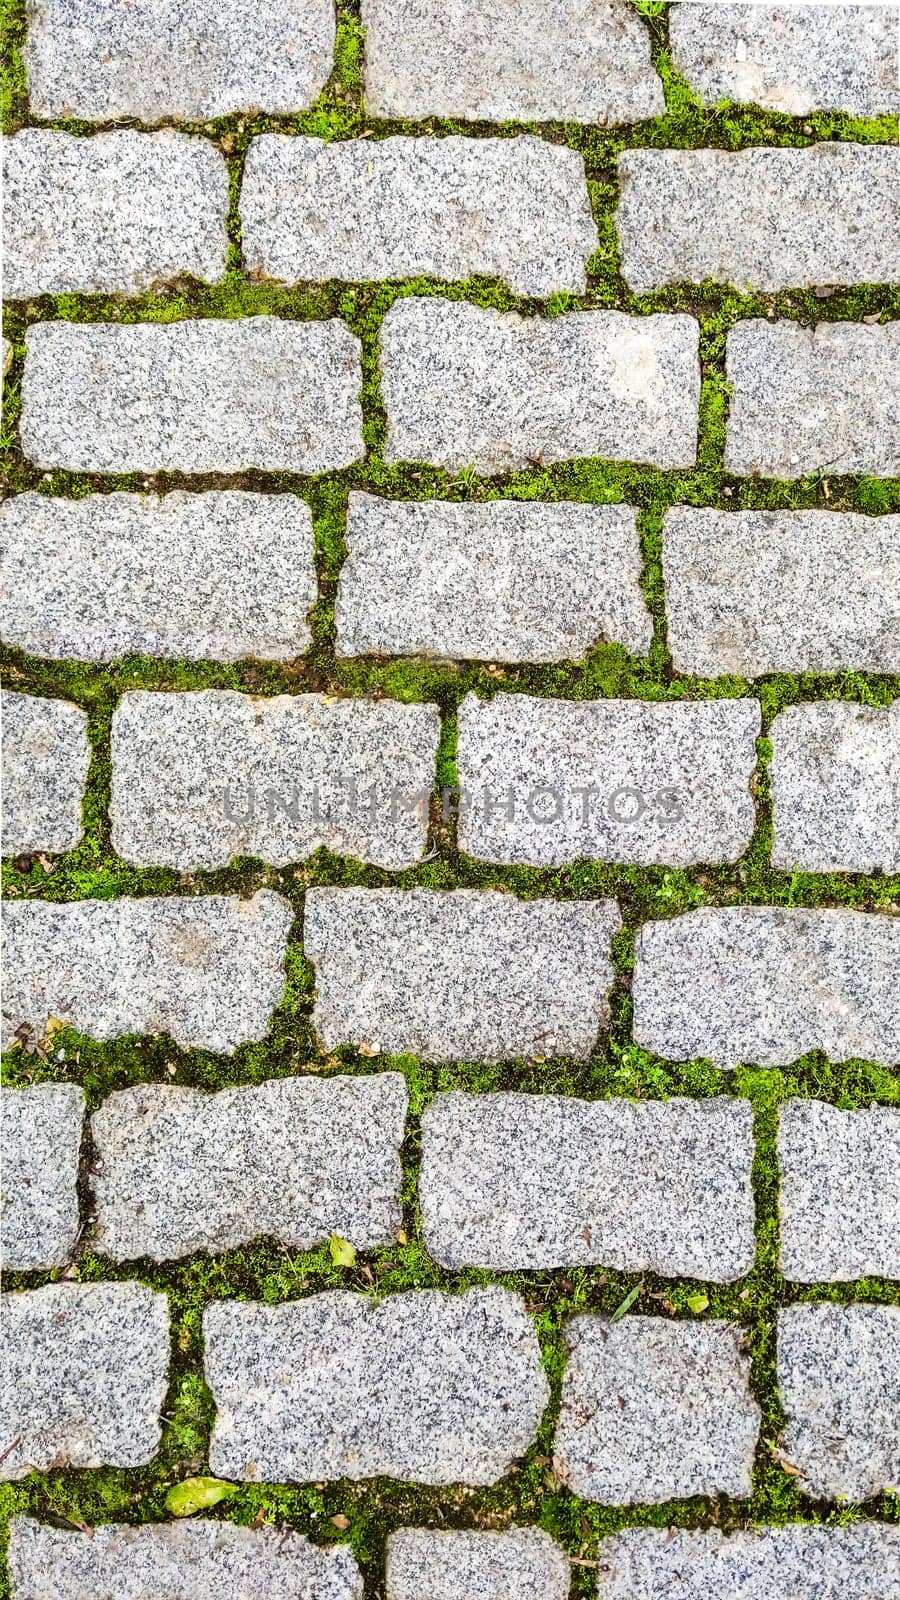 Texture of green grass sprouted between bricks of cobblestone path, top view. Concept of harmonious fusion of city and nature. by Laguna781